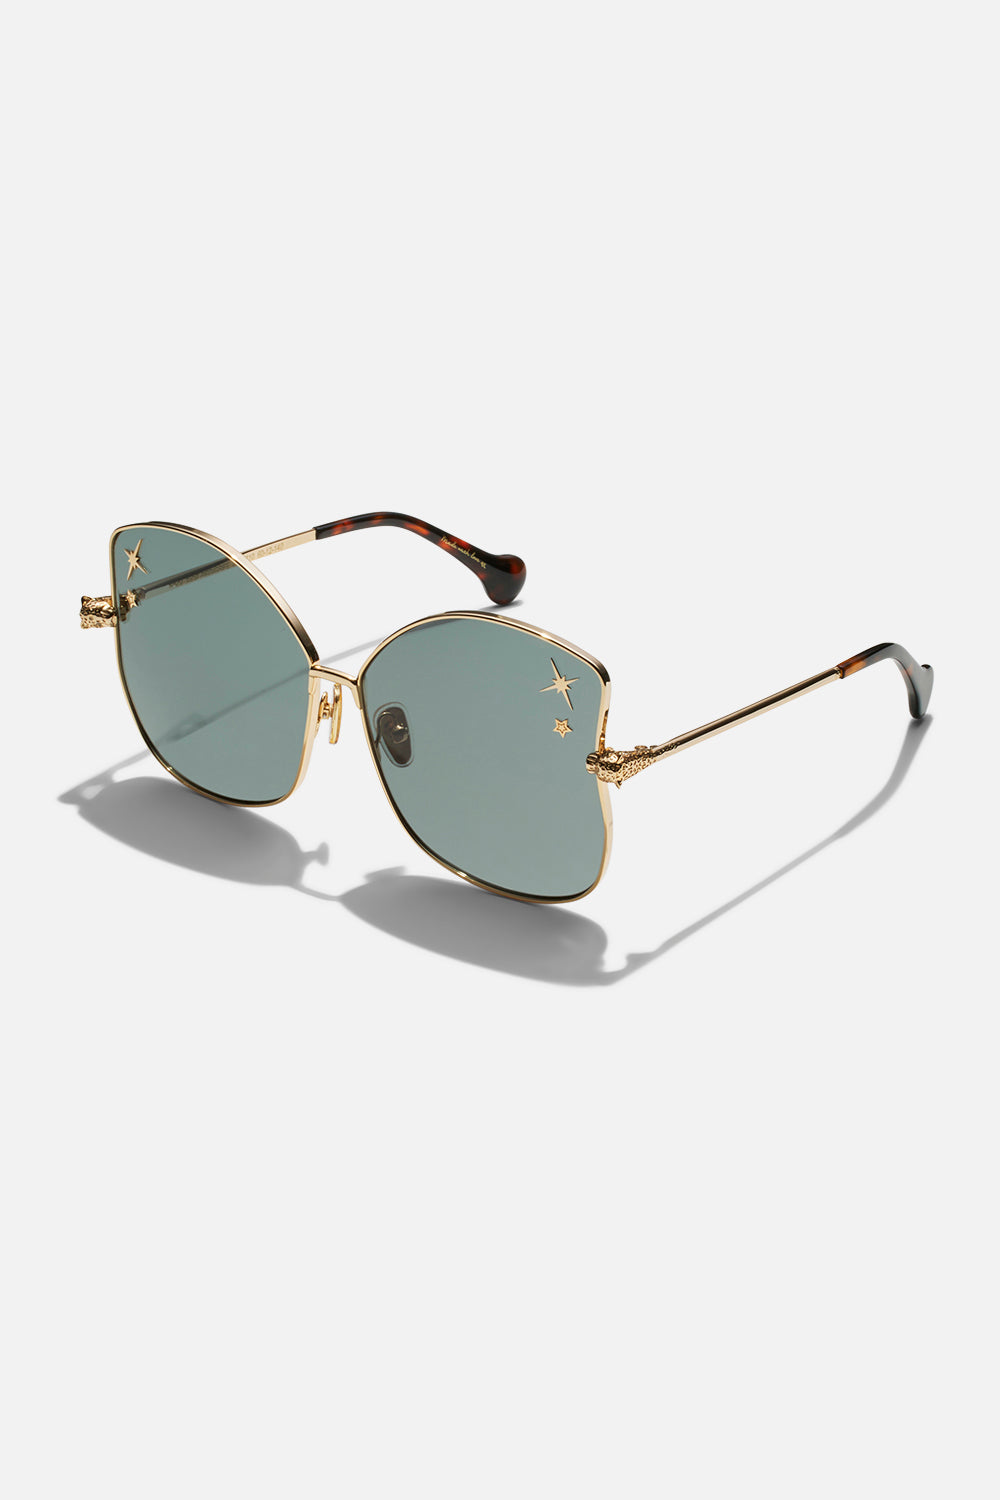 Pool Side Pedigree oversized gold framed sunglasses by CAMILLA